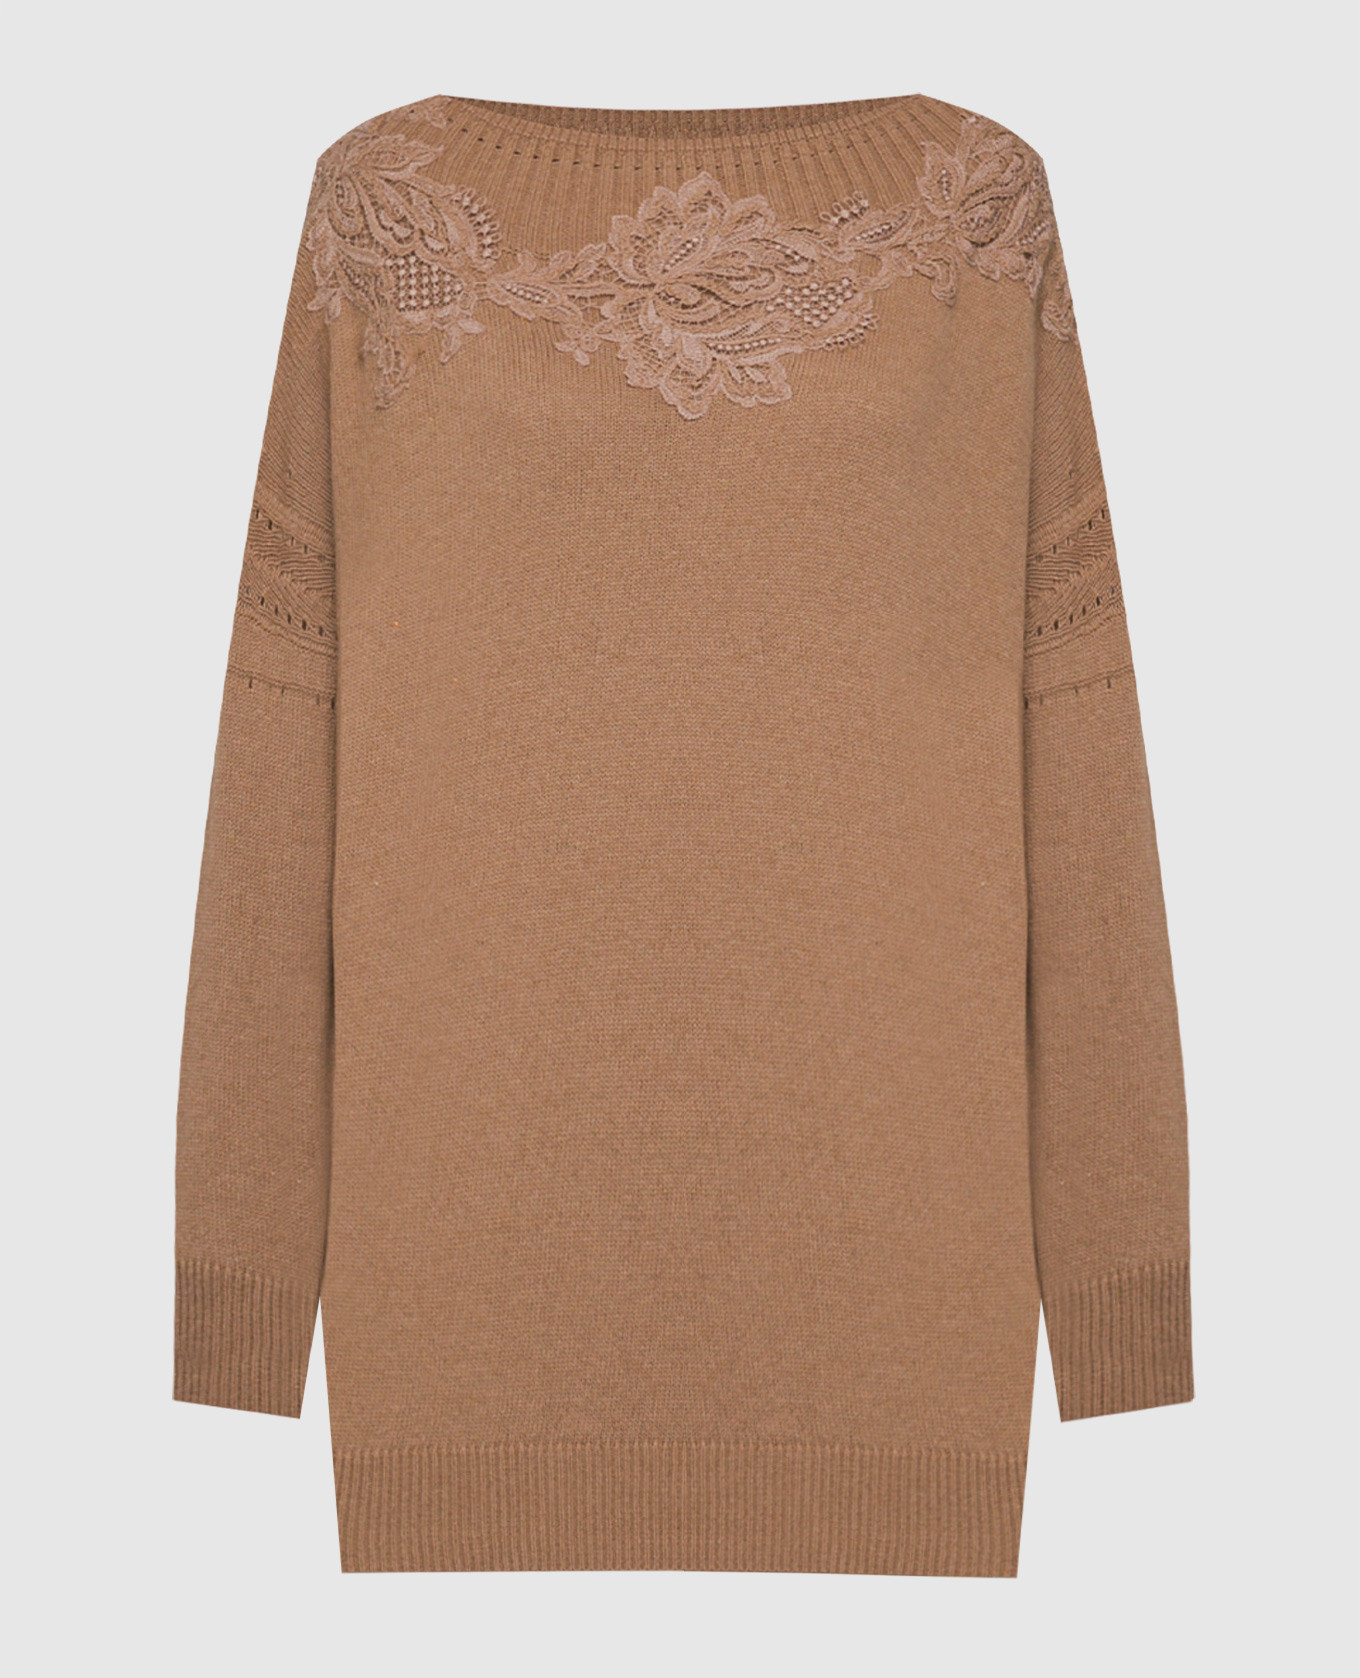 Brown jumper with lace